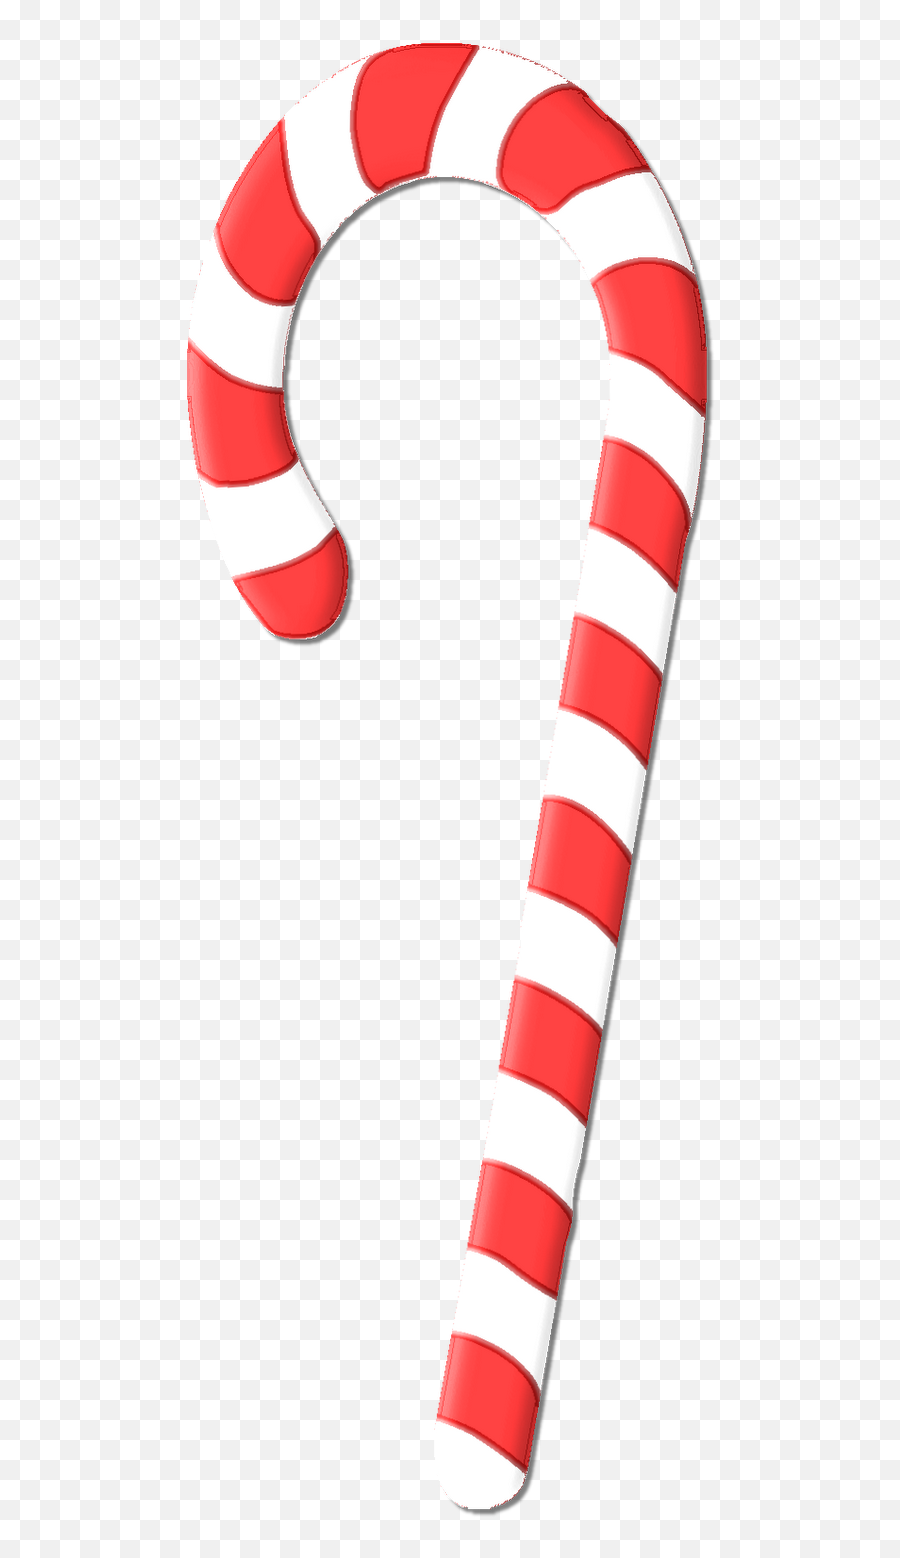 Candy Cane Product Font Line - Transparent Candy Cane Line Emoji,Candy Cane Emoji